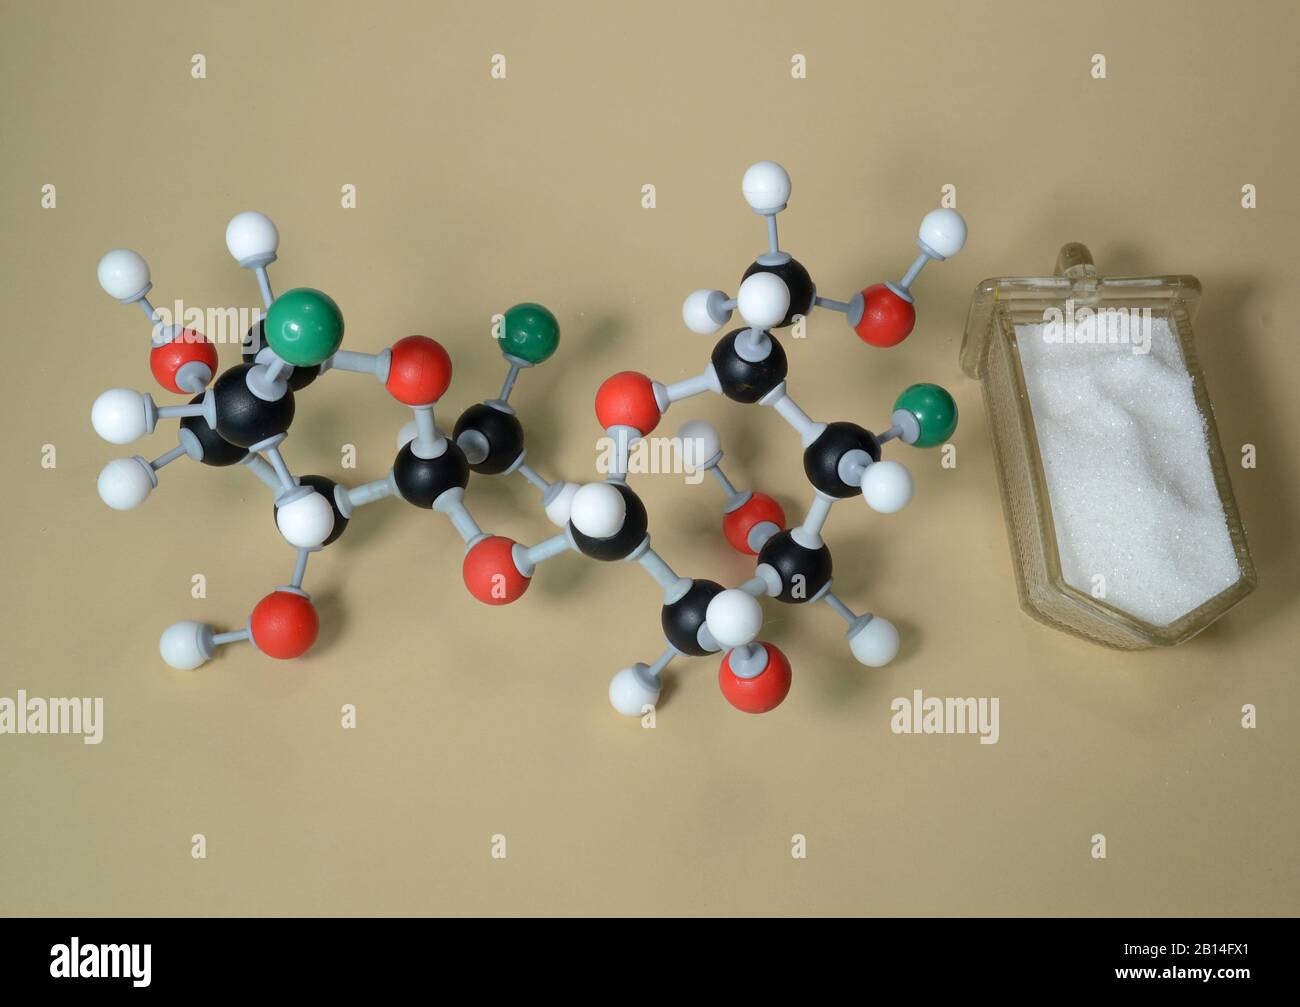 Molecule model of the sweetener Sucralose (E955). White is Hydrogen, black is Carbon, red is Oxygen, and green is chlorine. Stock Photo